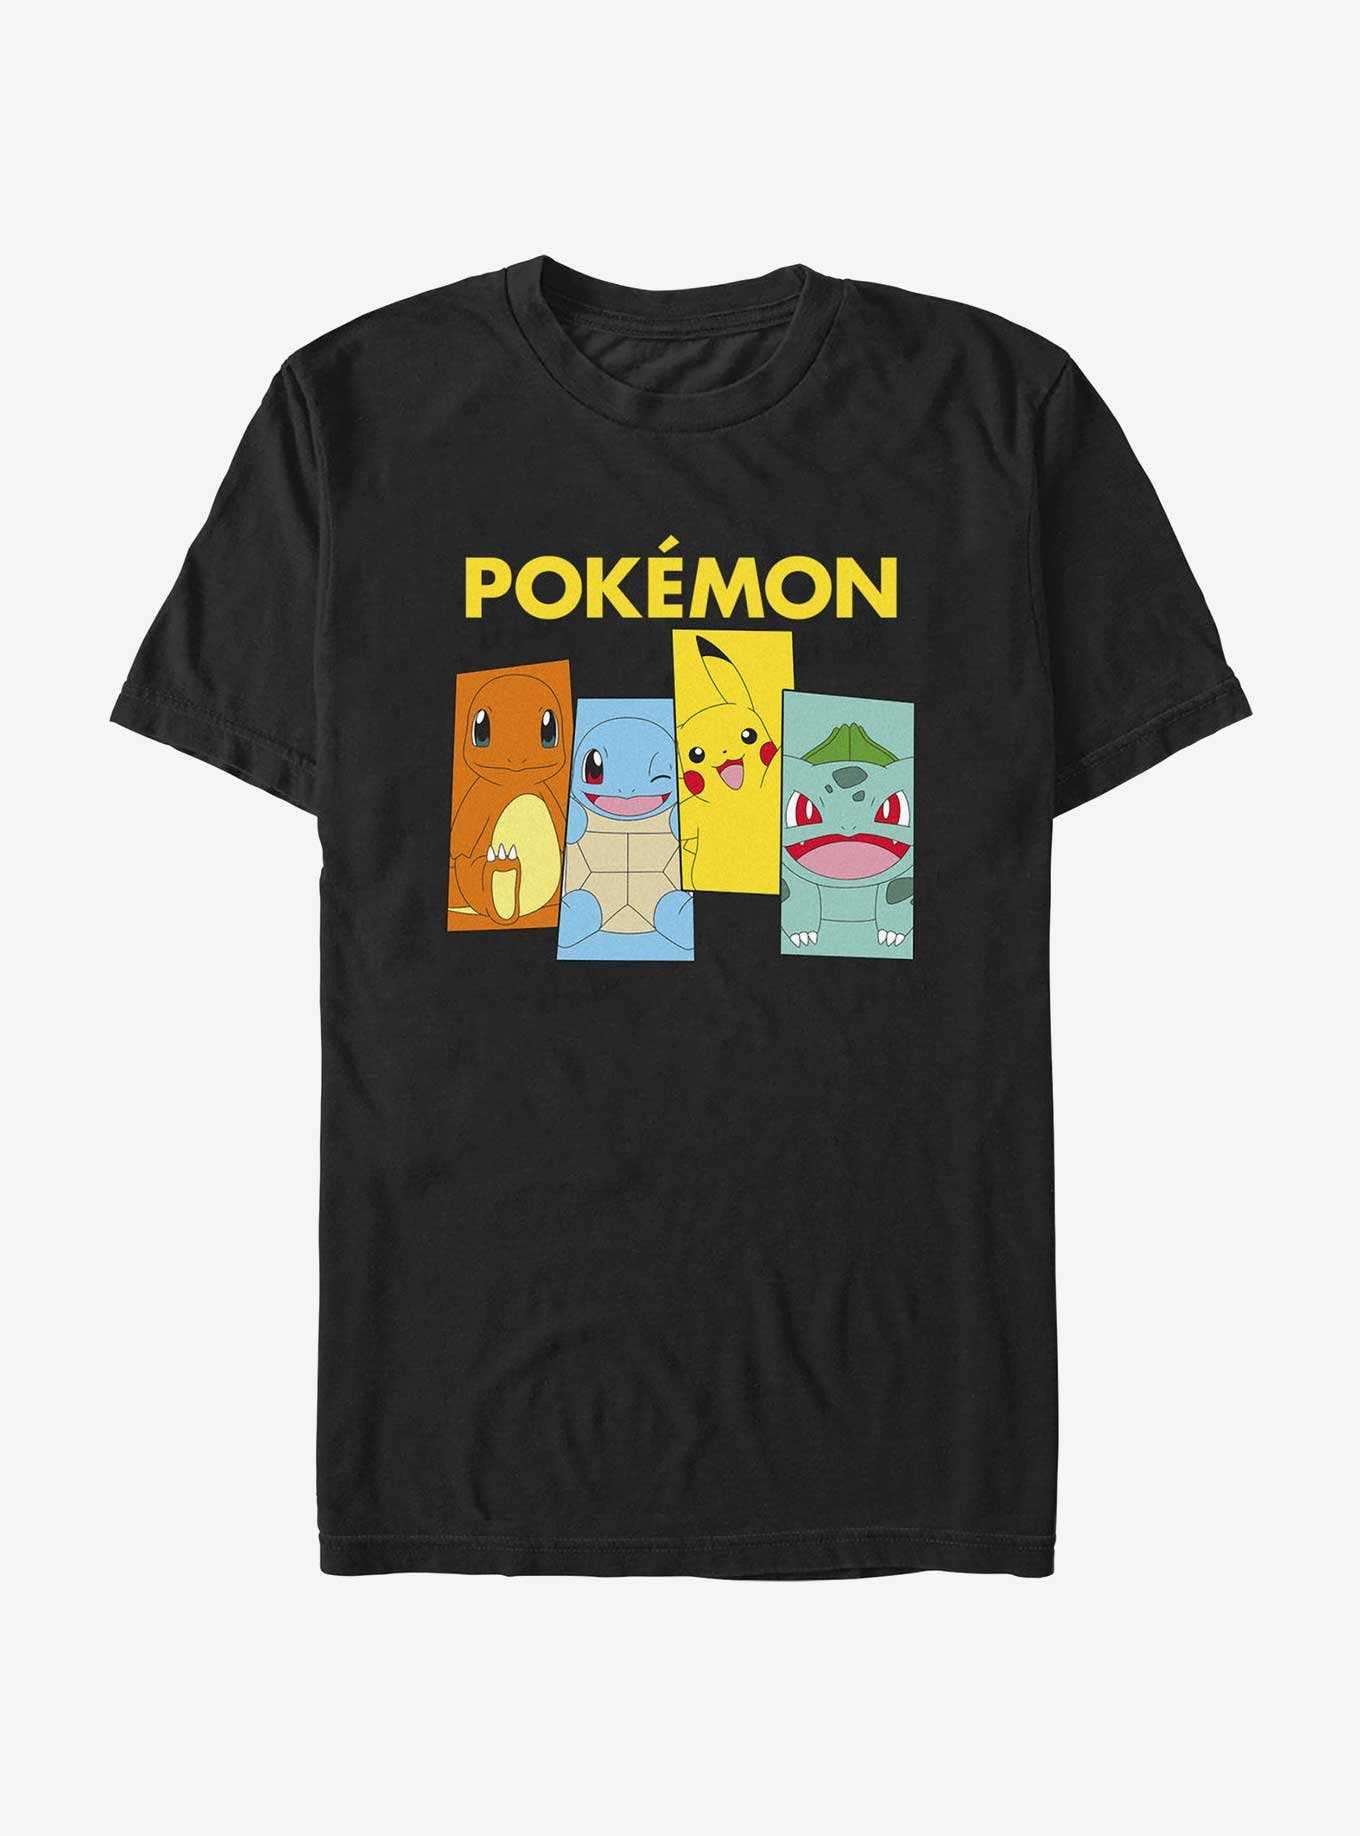 Pokemon Charmander, Squirtle, Pikachu, and Bulbasaur Extra Soft T-Shirt, , hi-res